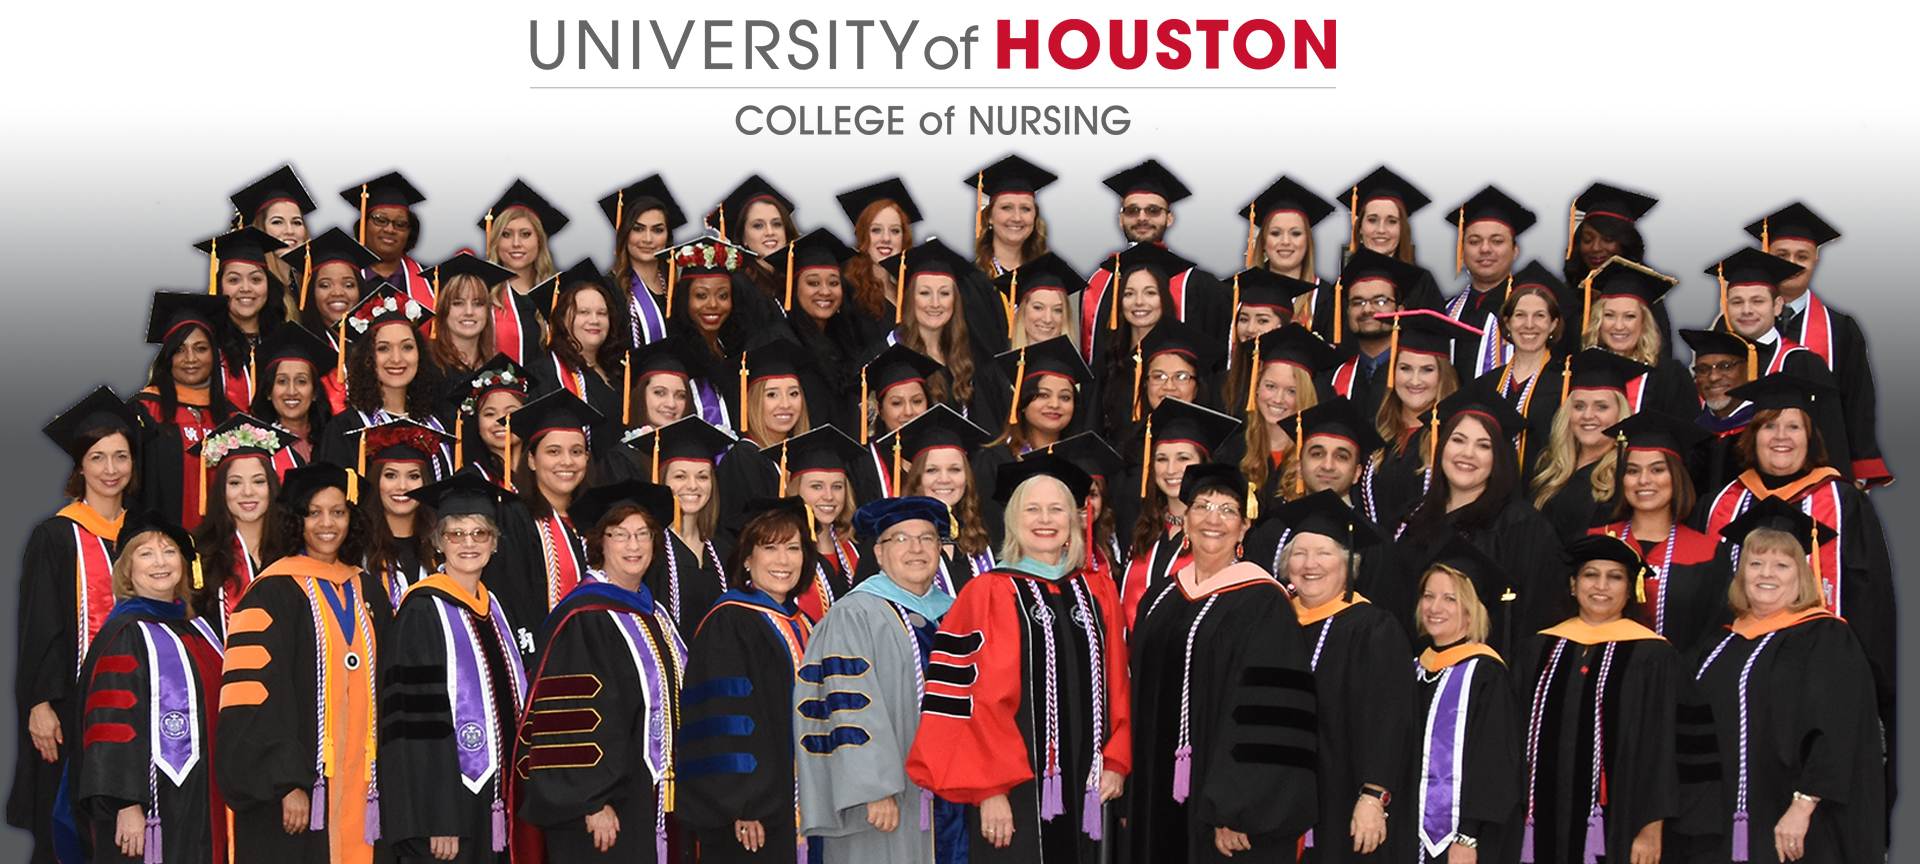 UH College of nursing faculty and graduating students at 2016 Commencement